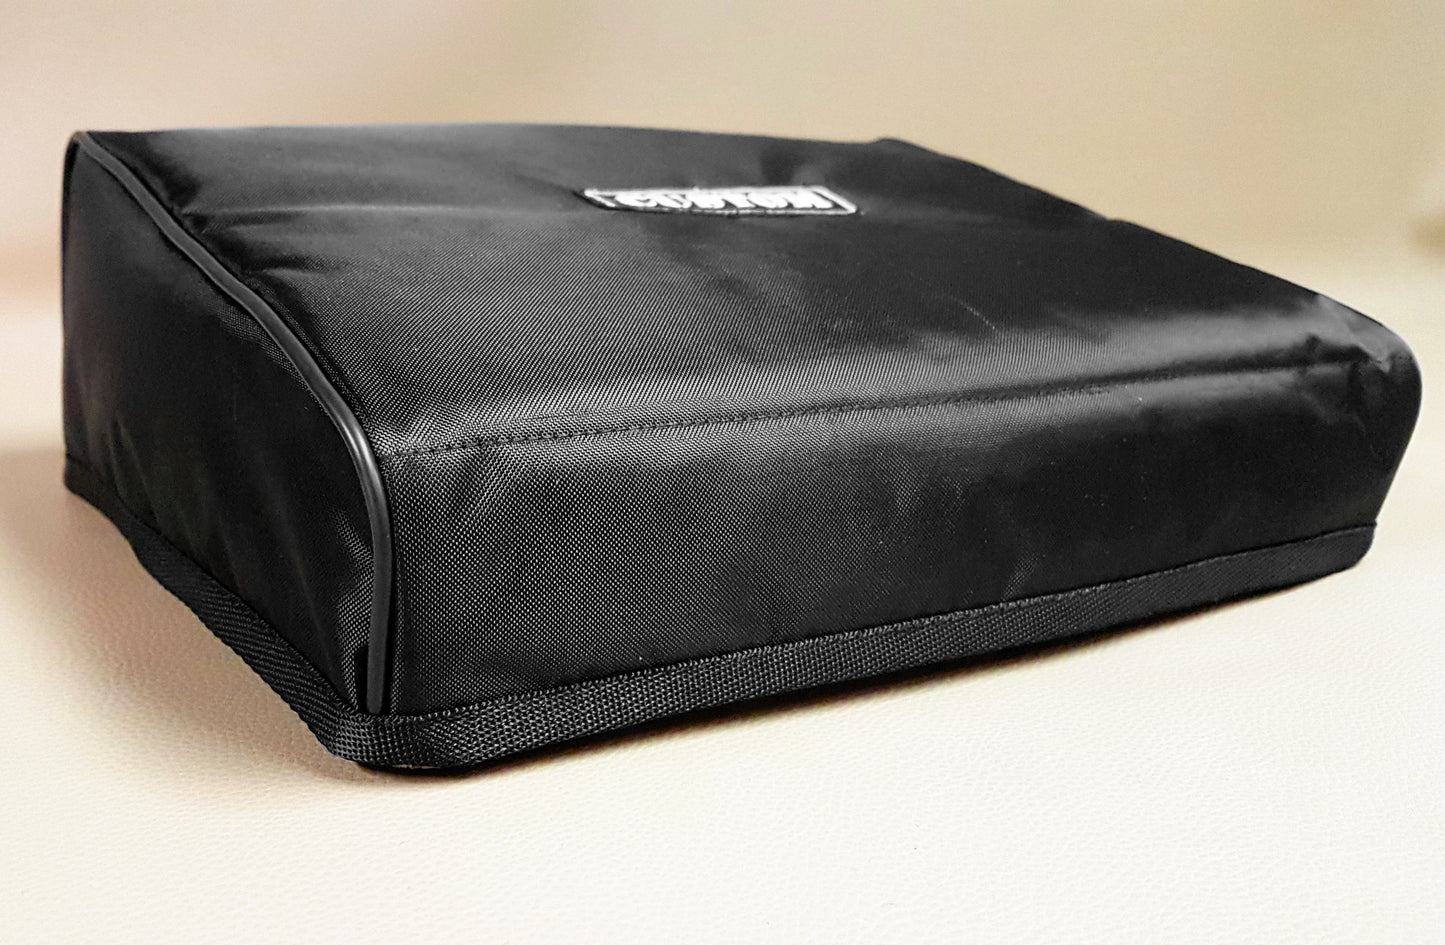 Custom padded cover for ROLAND TD-30 drum sound module